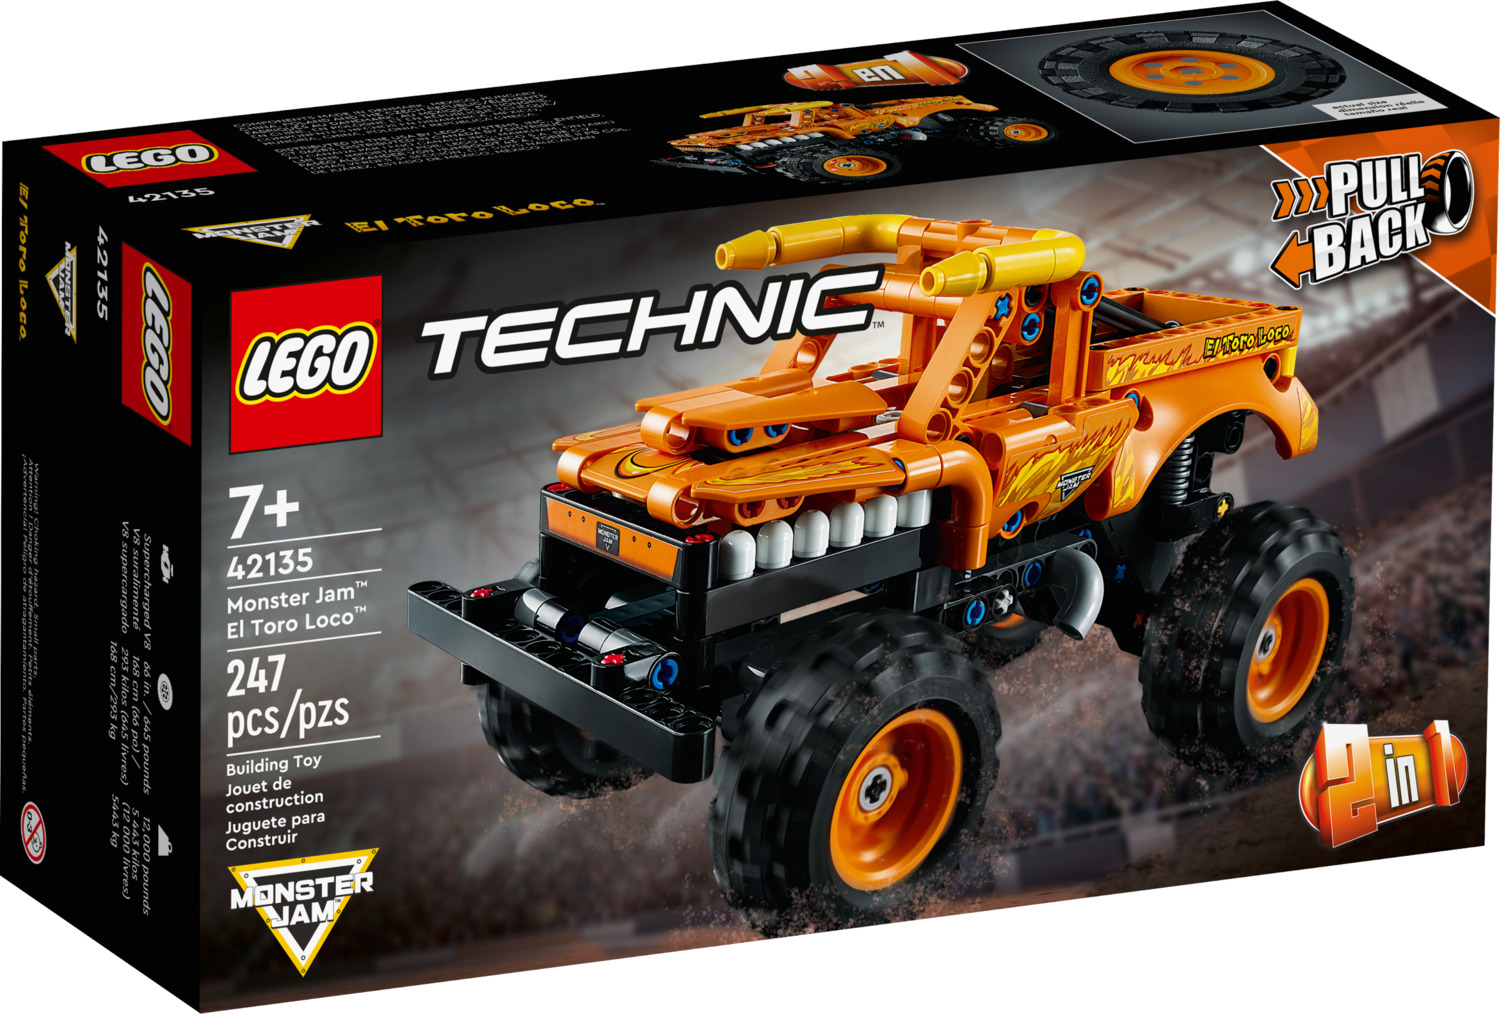 LEGO® Technic™ Toys and Sets